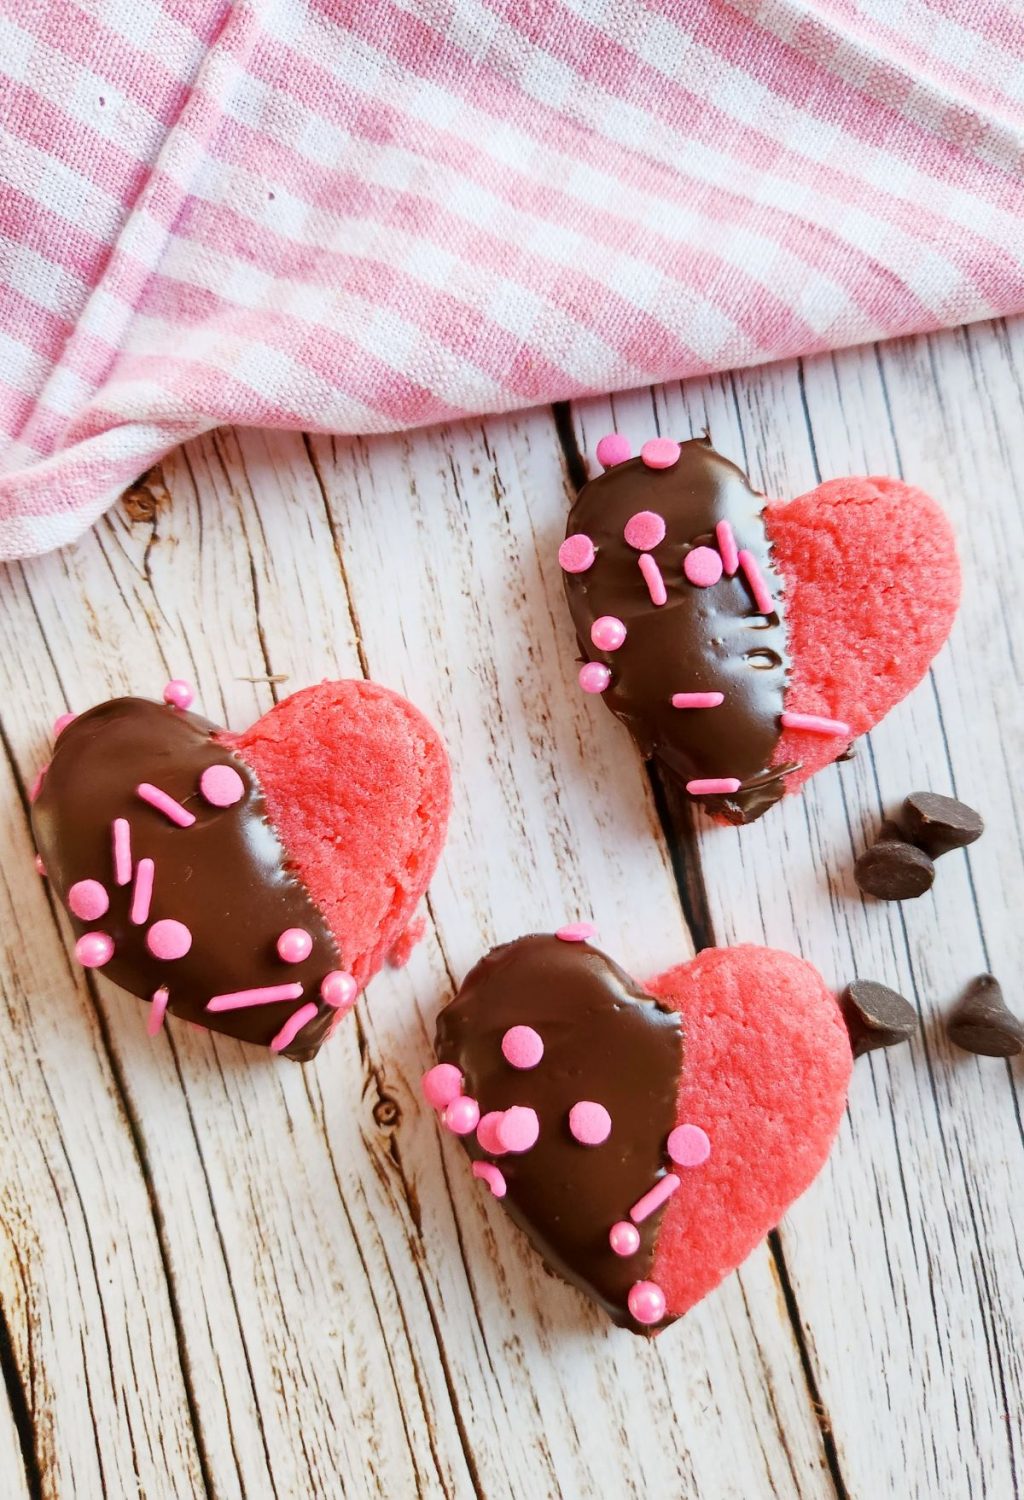 Chocolate heart cookies with pink sprinkles on a wooden table.